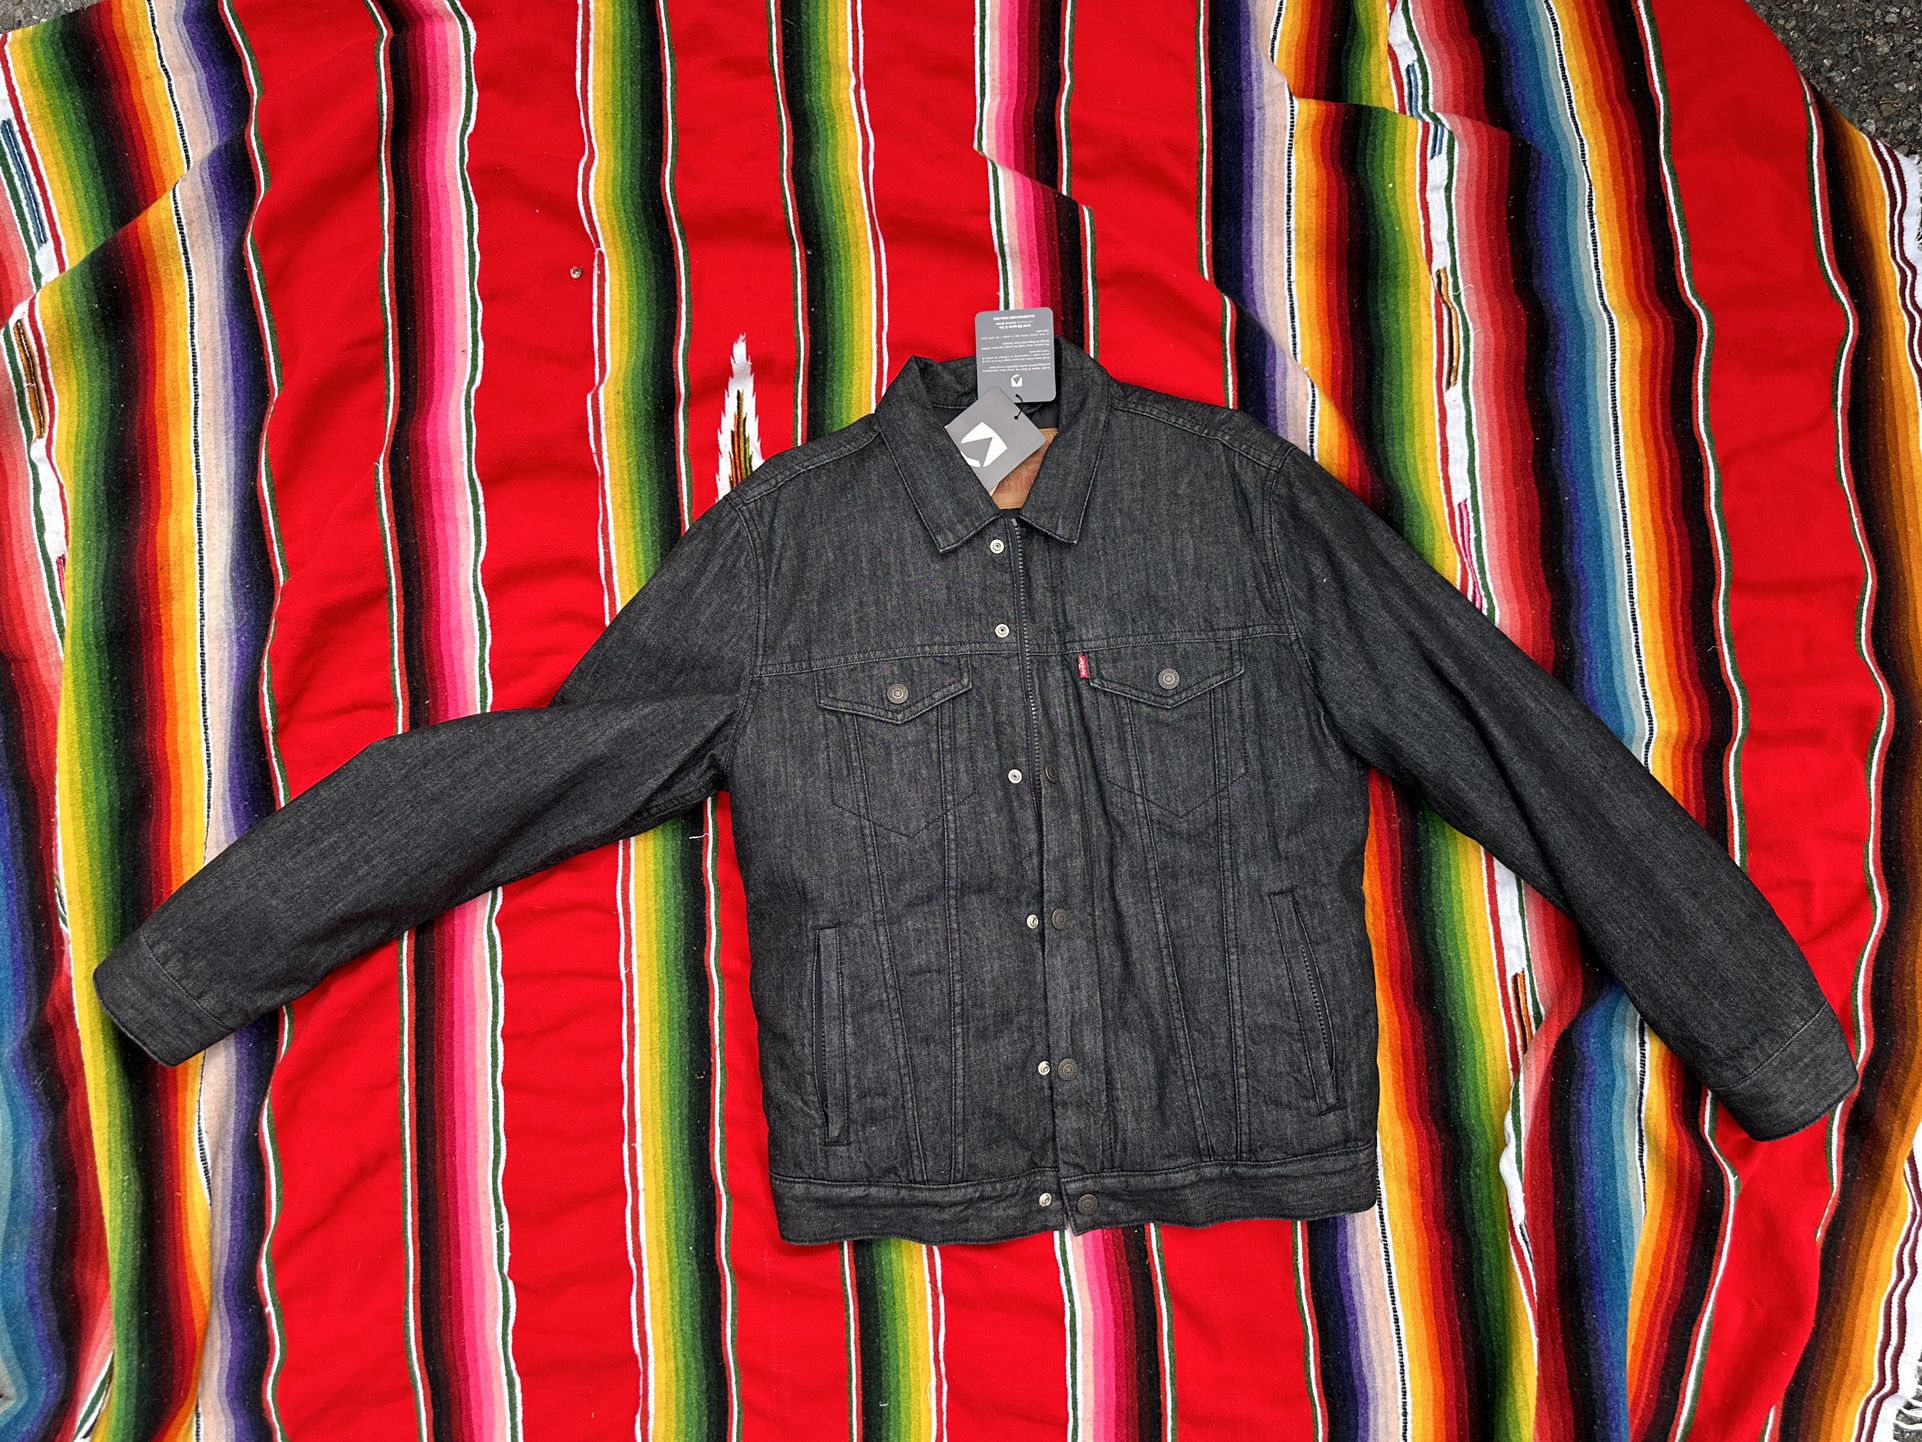 Levis Denim Jacket New With Tags 